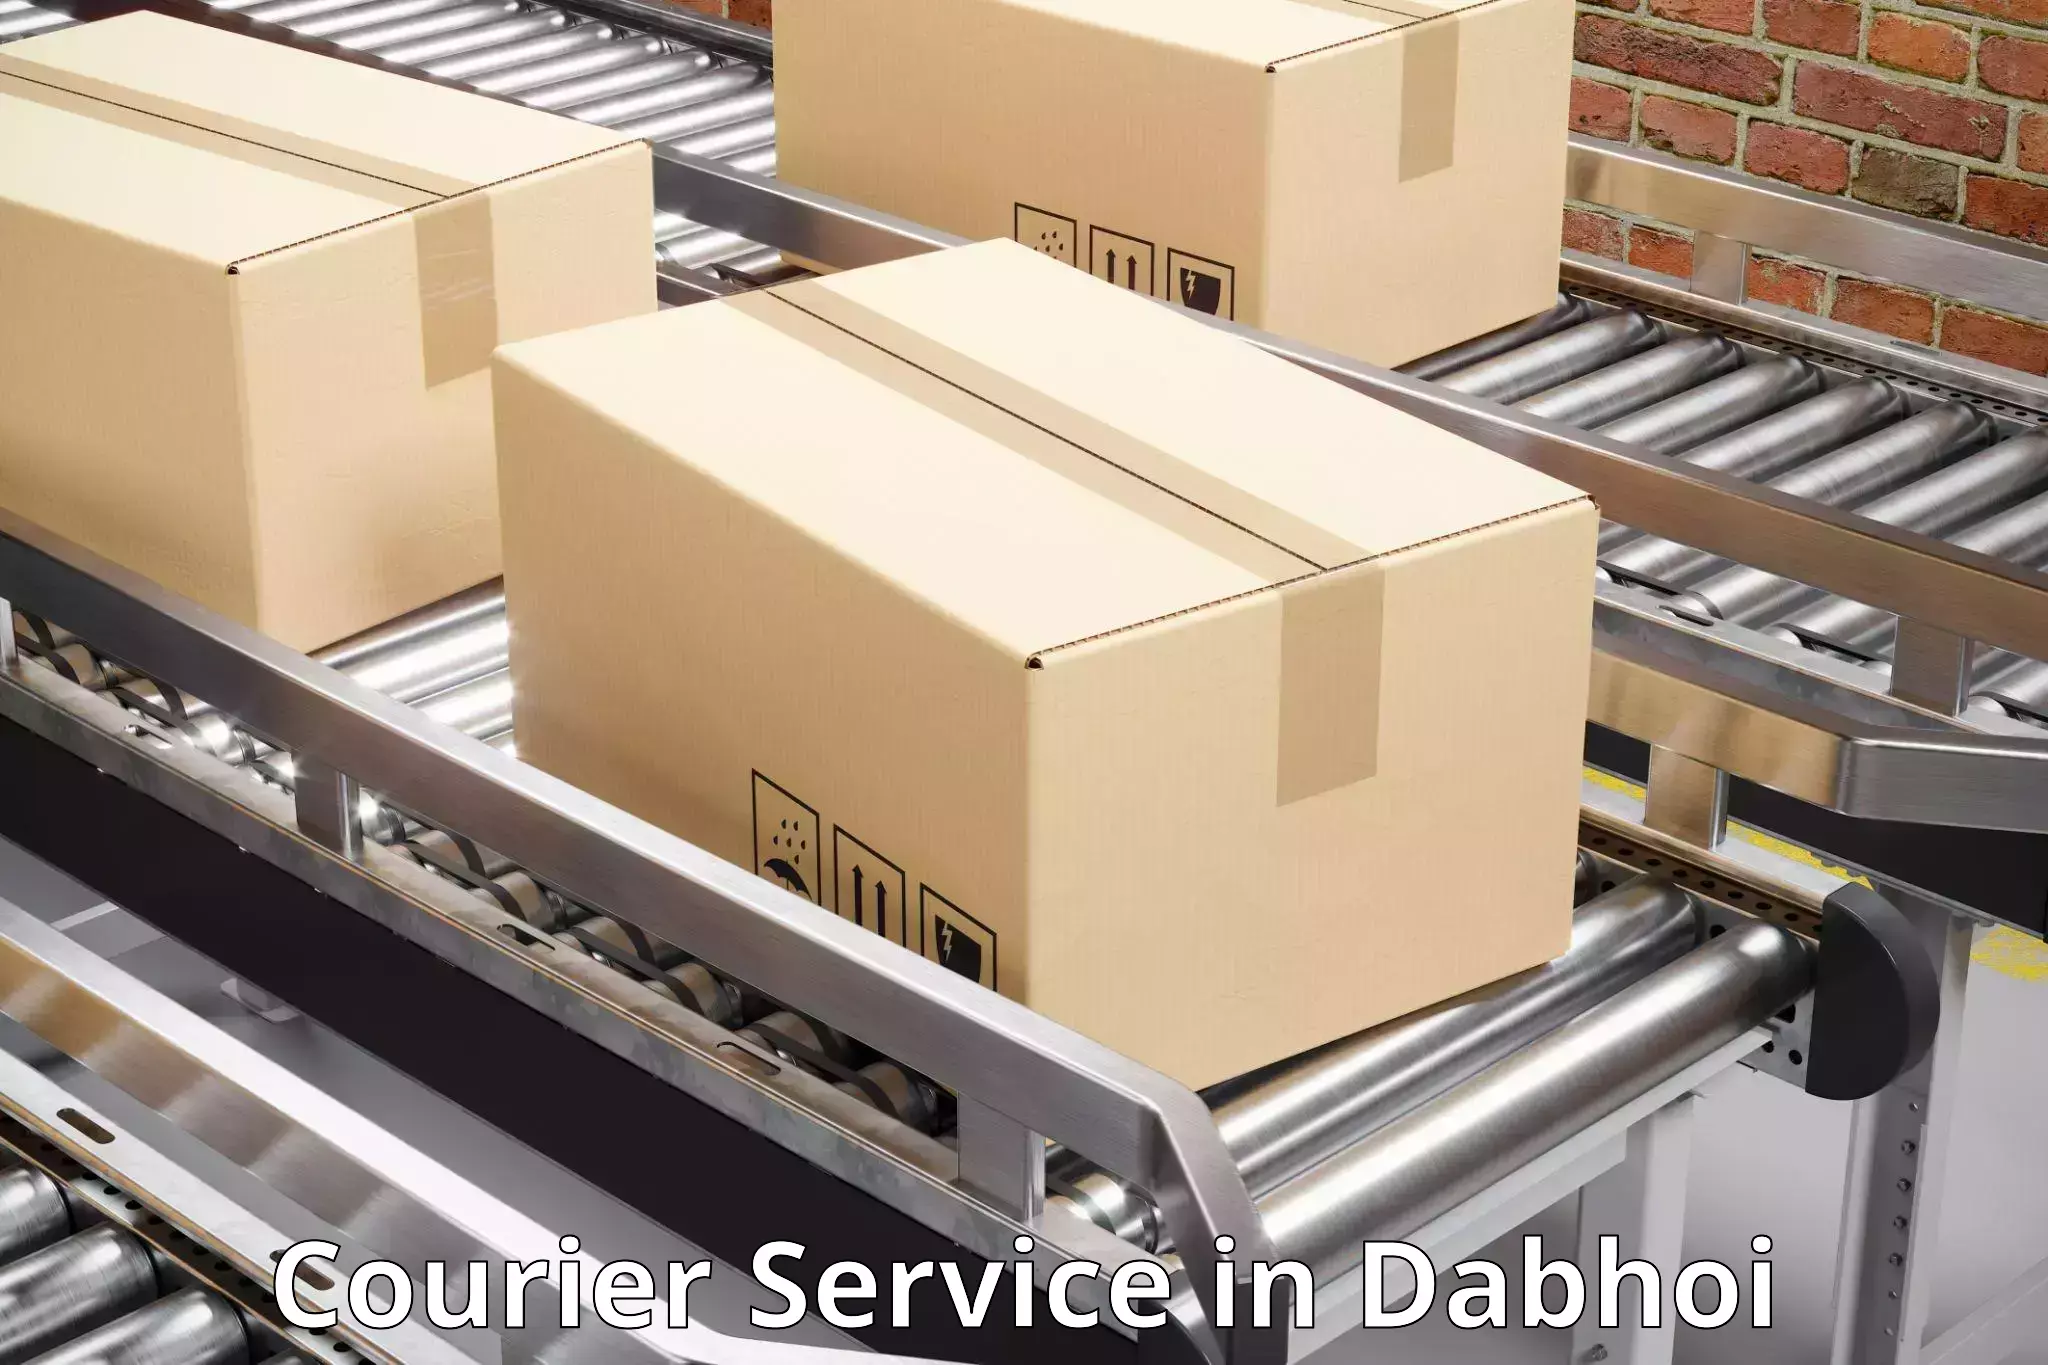 Quality courier services in Dabhoi